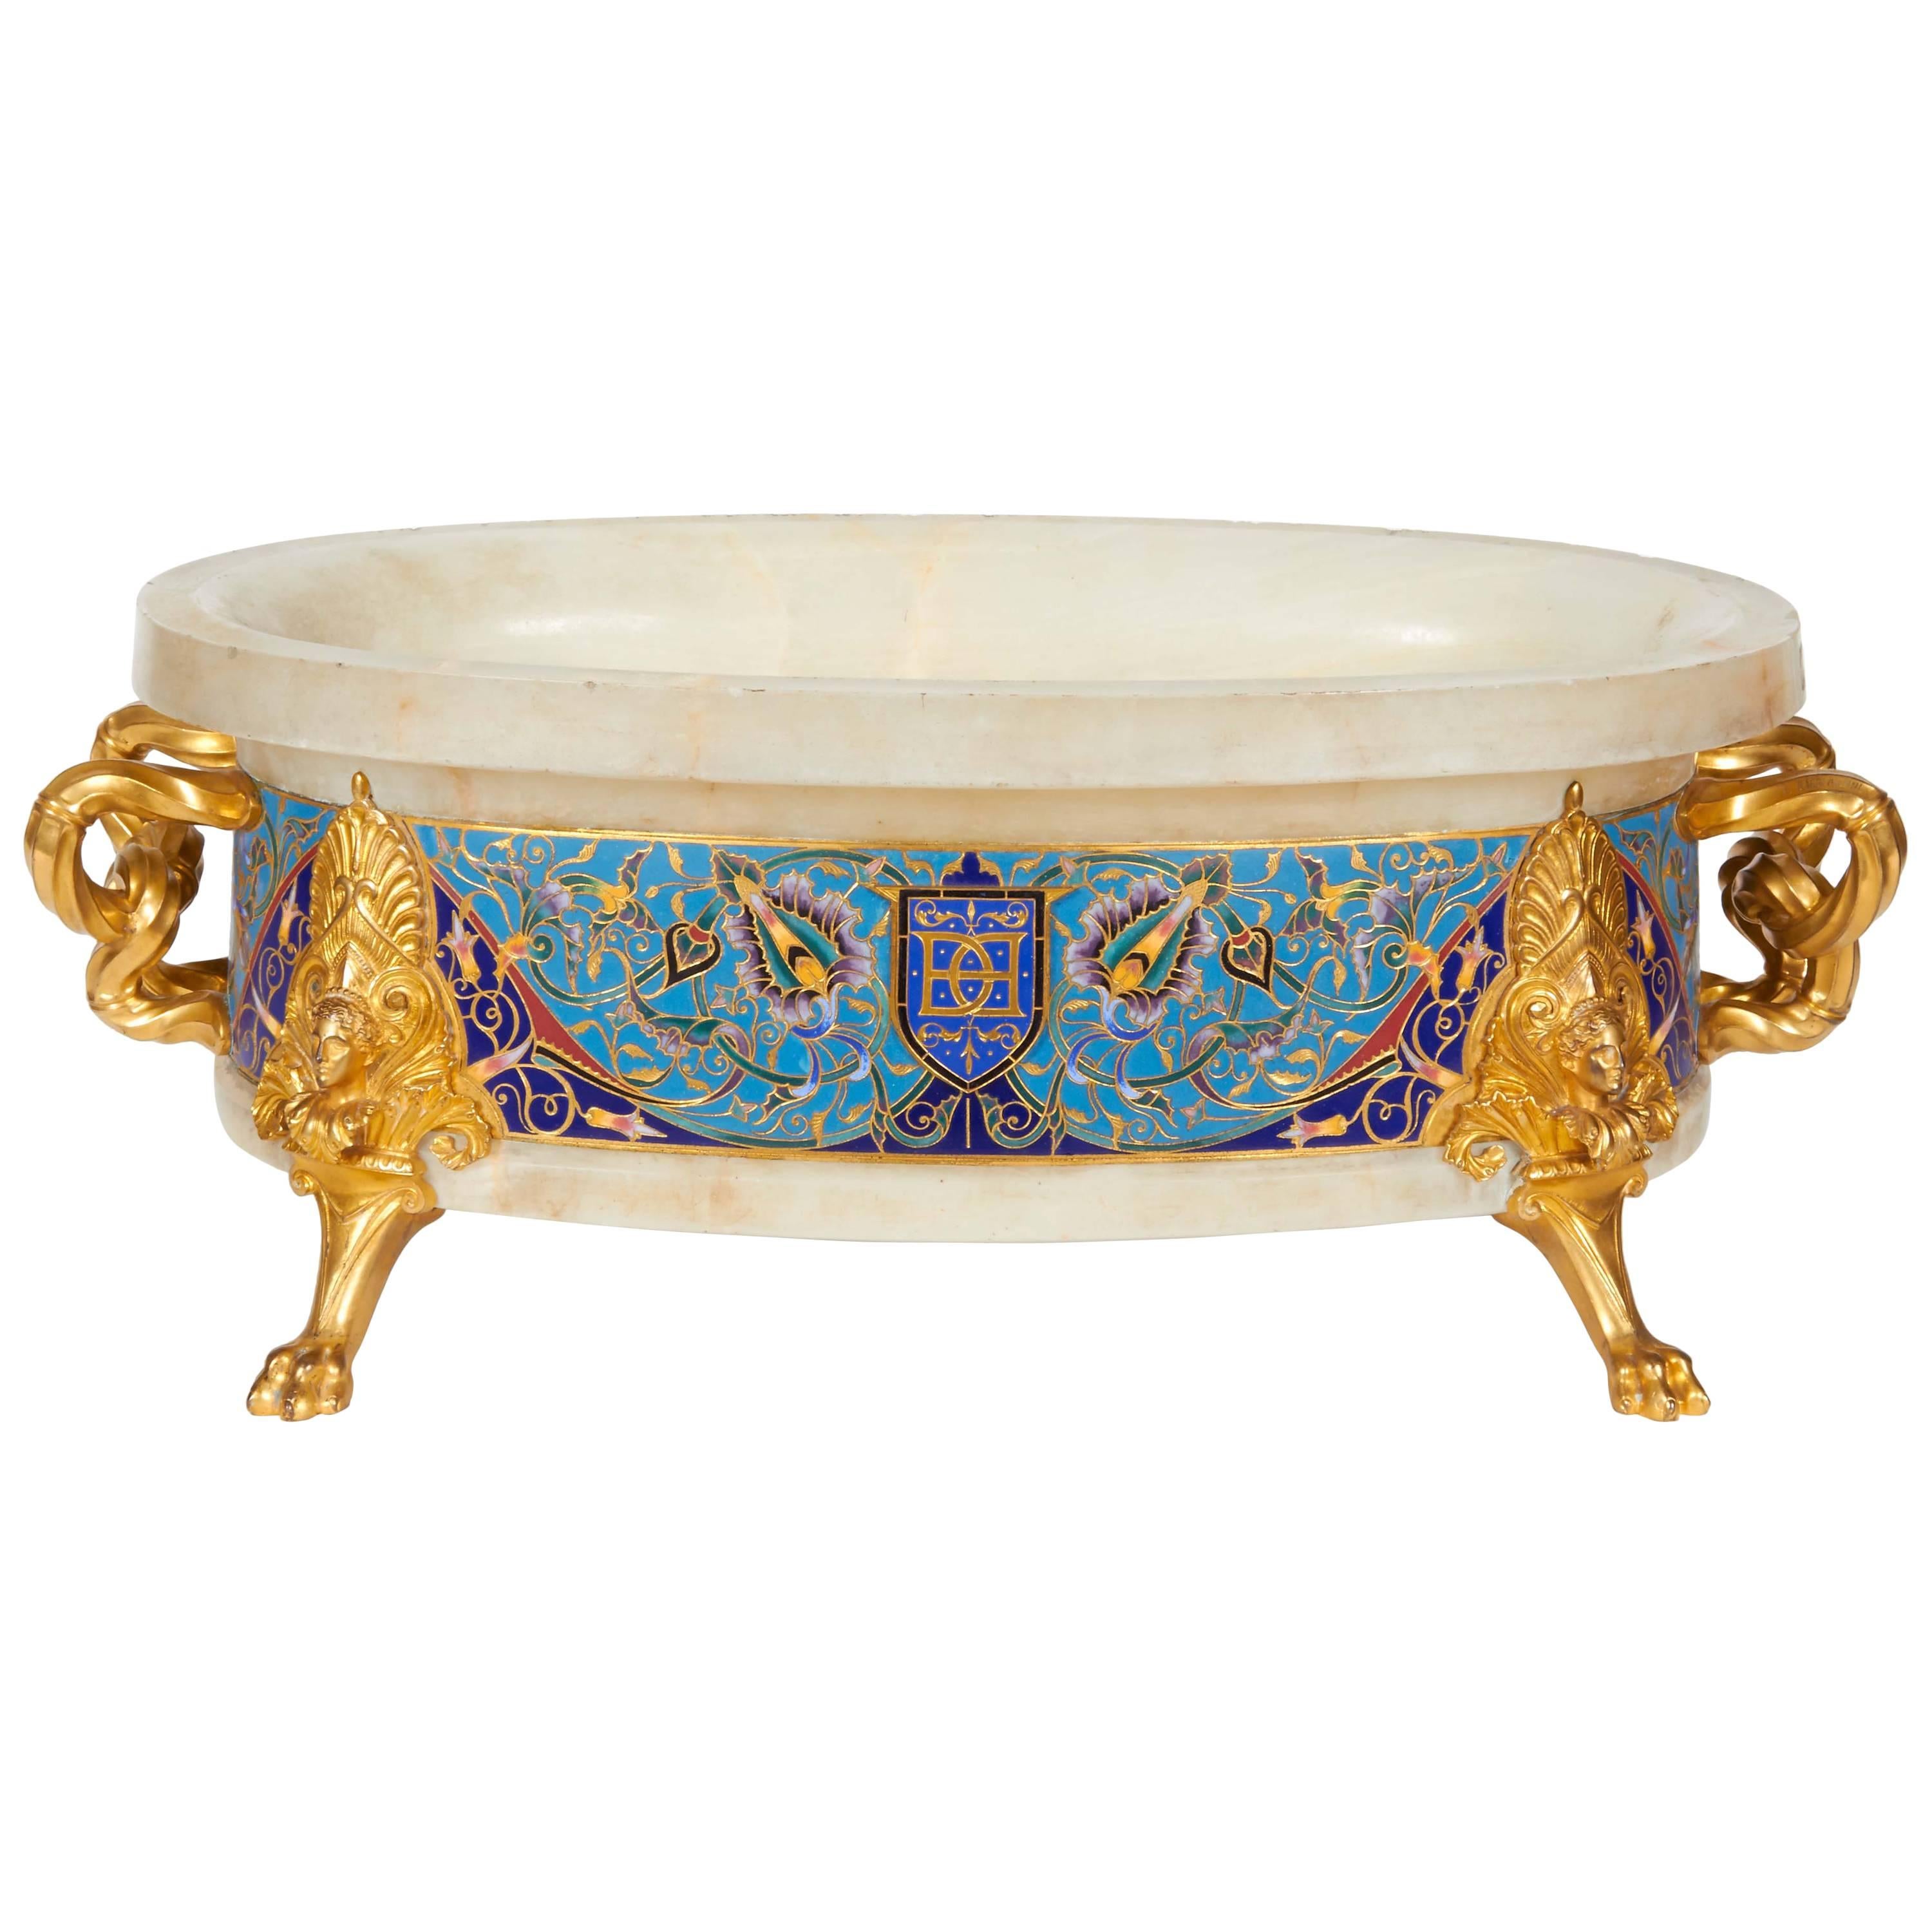 Ferdinand Barbedienne,
French, 1810-1892.
A large Néo-Grec ormolu and cloisonné champleve enamel decorated onyx jardinière centerpiece. Most possibly designed by Louis-Constant Sévin and Edouard Lievre / Lièvre.

One handle signed F.